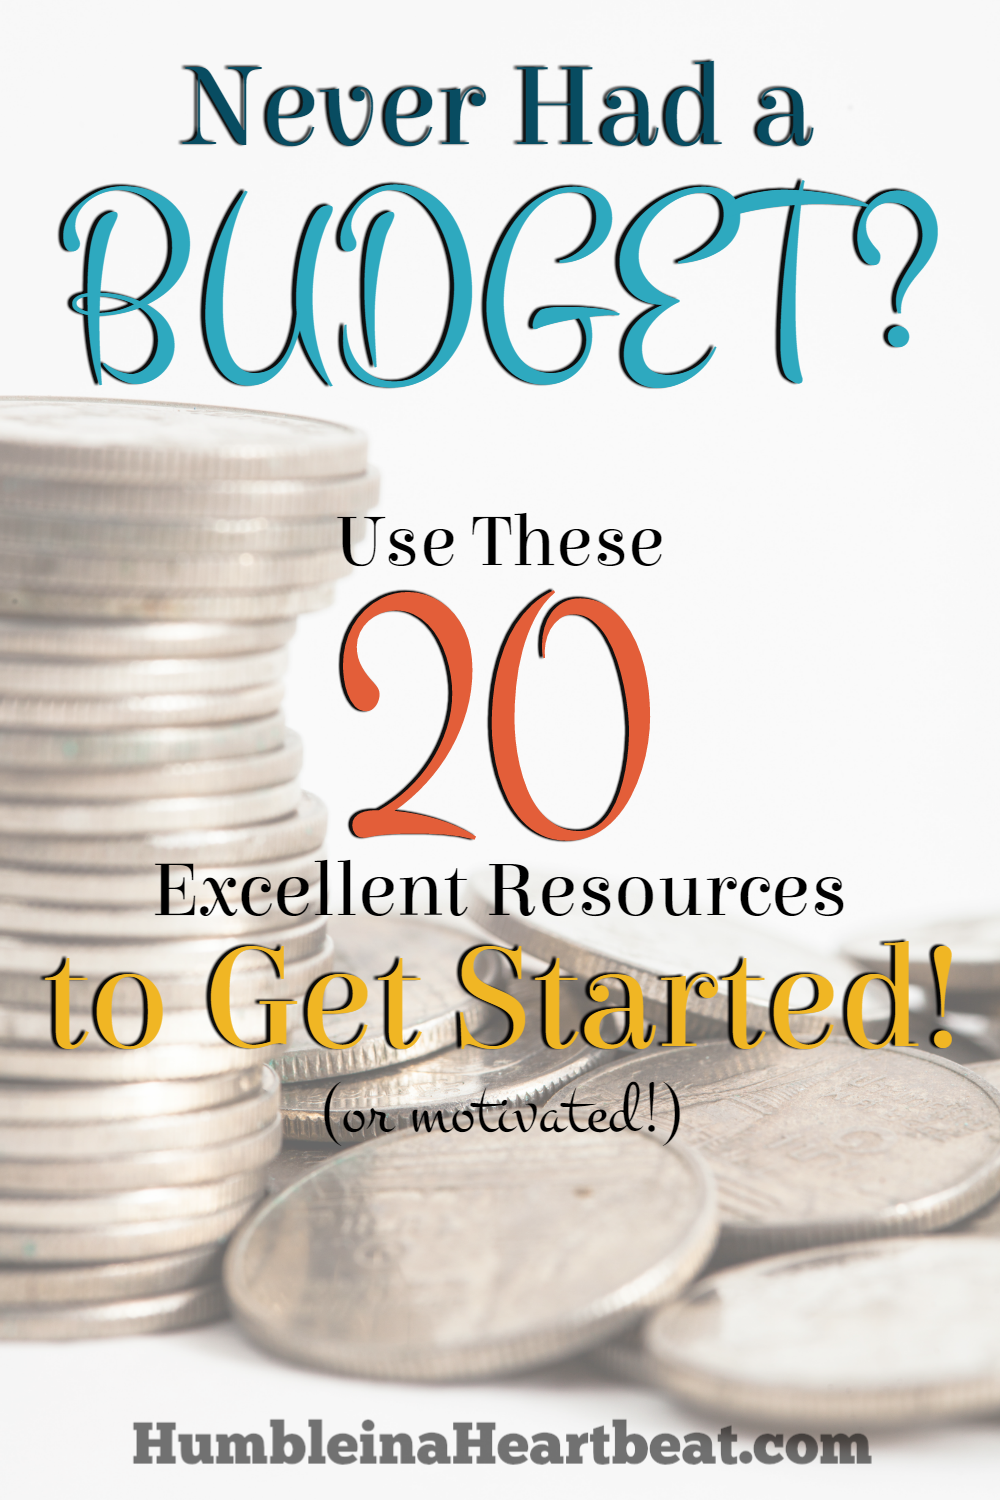 Budgeting can seem challenging for anyone who has never done it. So here are 20 excellent resources to help you get a budget started now and reach your goals faster!